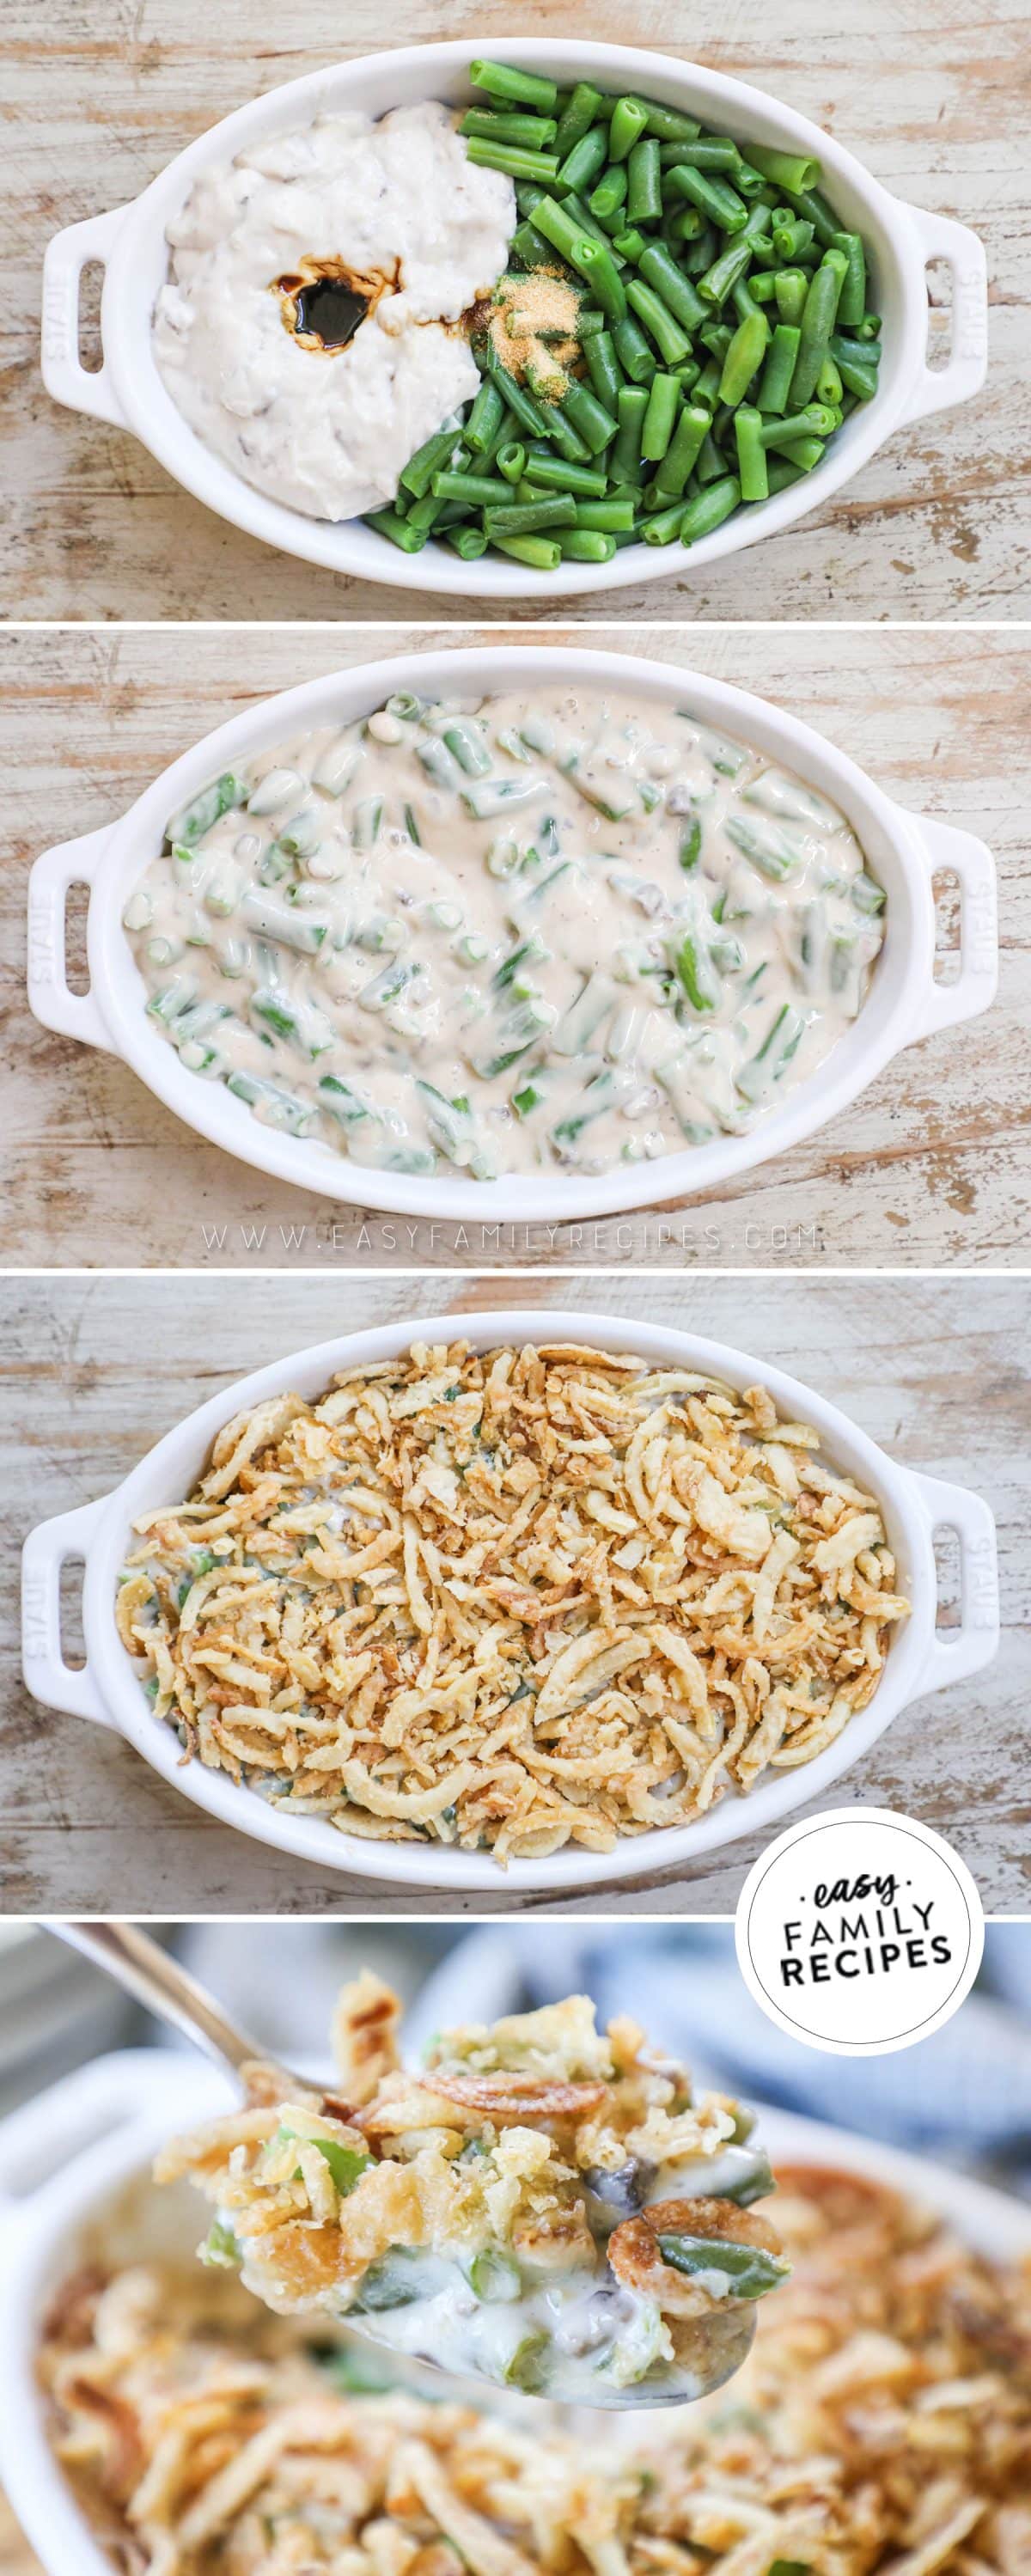 how to make green bean casserole 1)combine ingredients 2)mix together 3)top with onions 4)bake and serve.